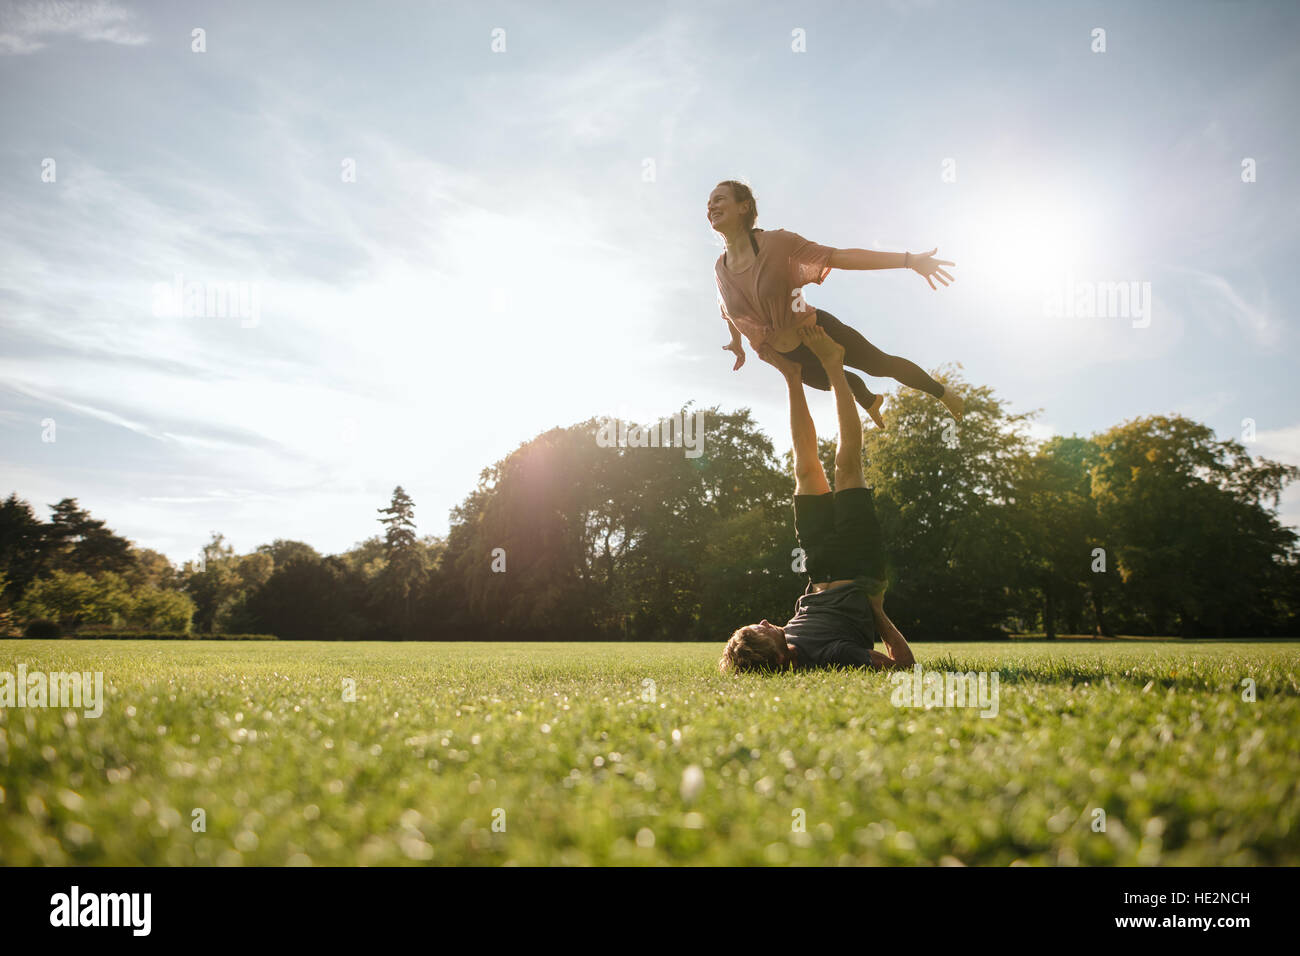 Fit young couple doing acrobatic yoga in park. Man lying on grass and balancing woman in his feet. Stock Photo